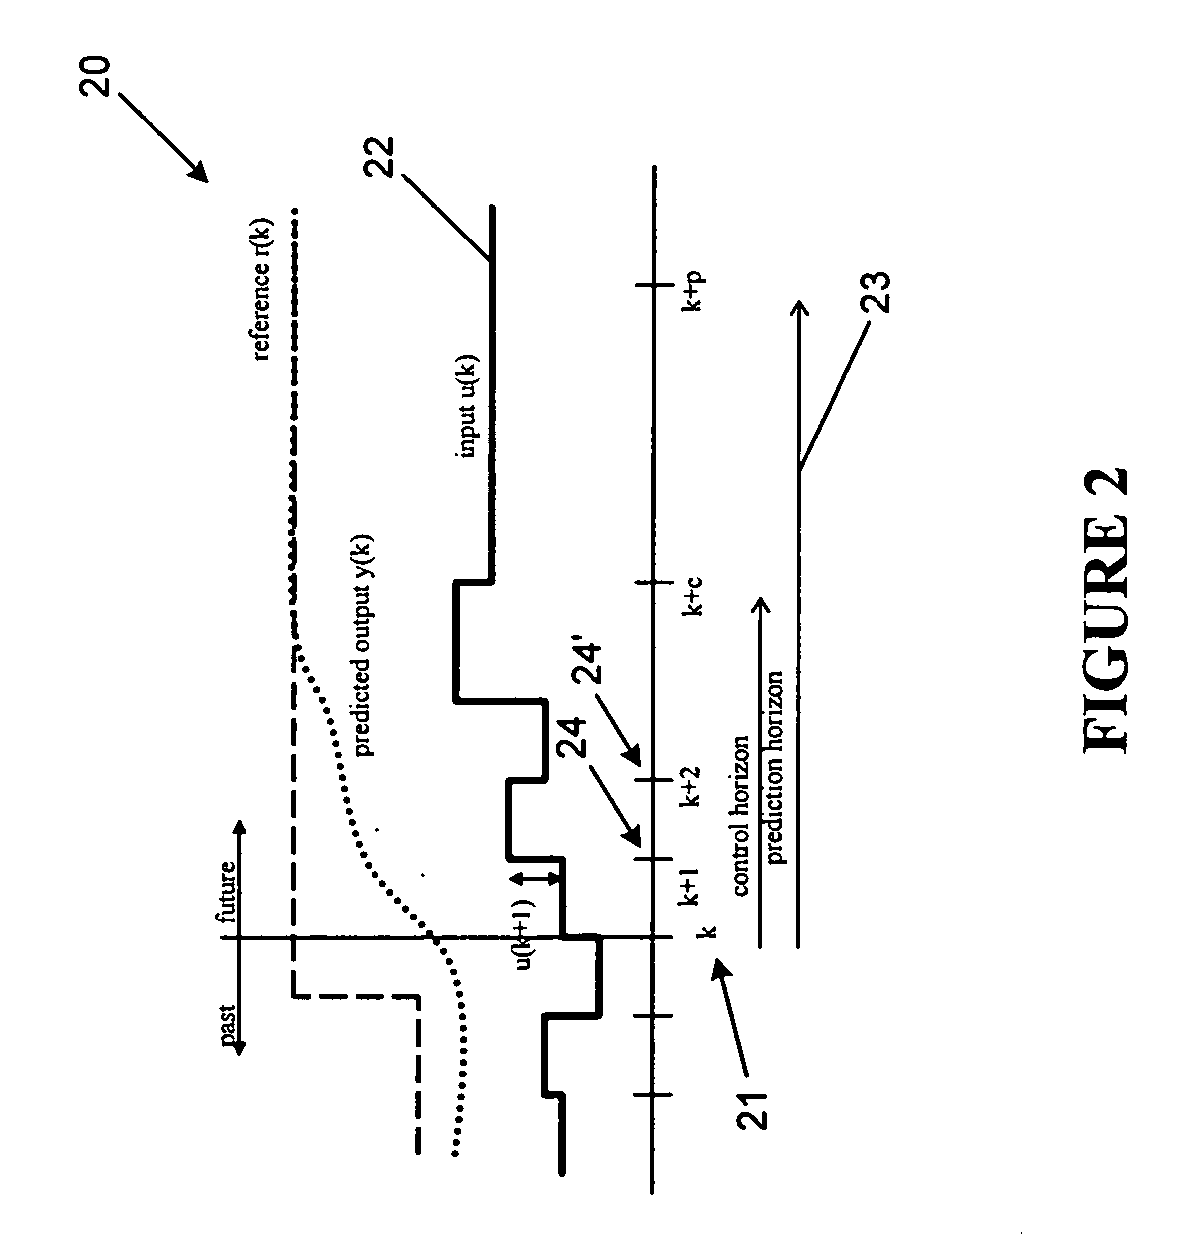 Model-based control systems and methods for gas turbine engines